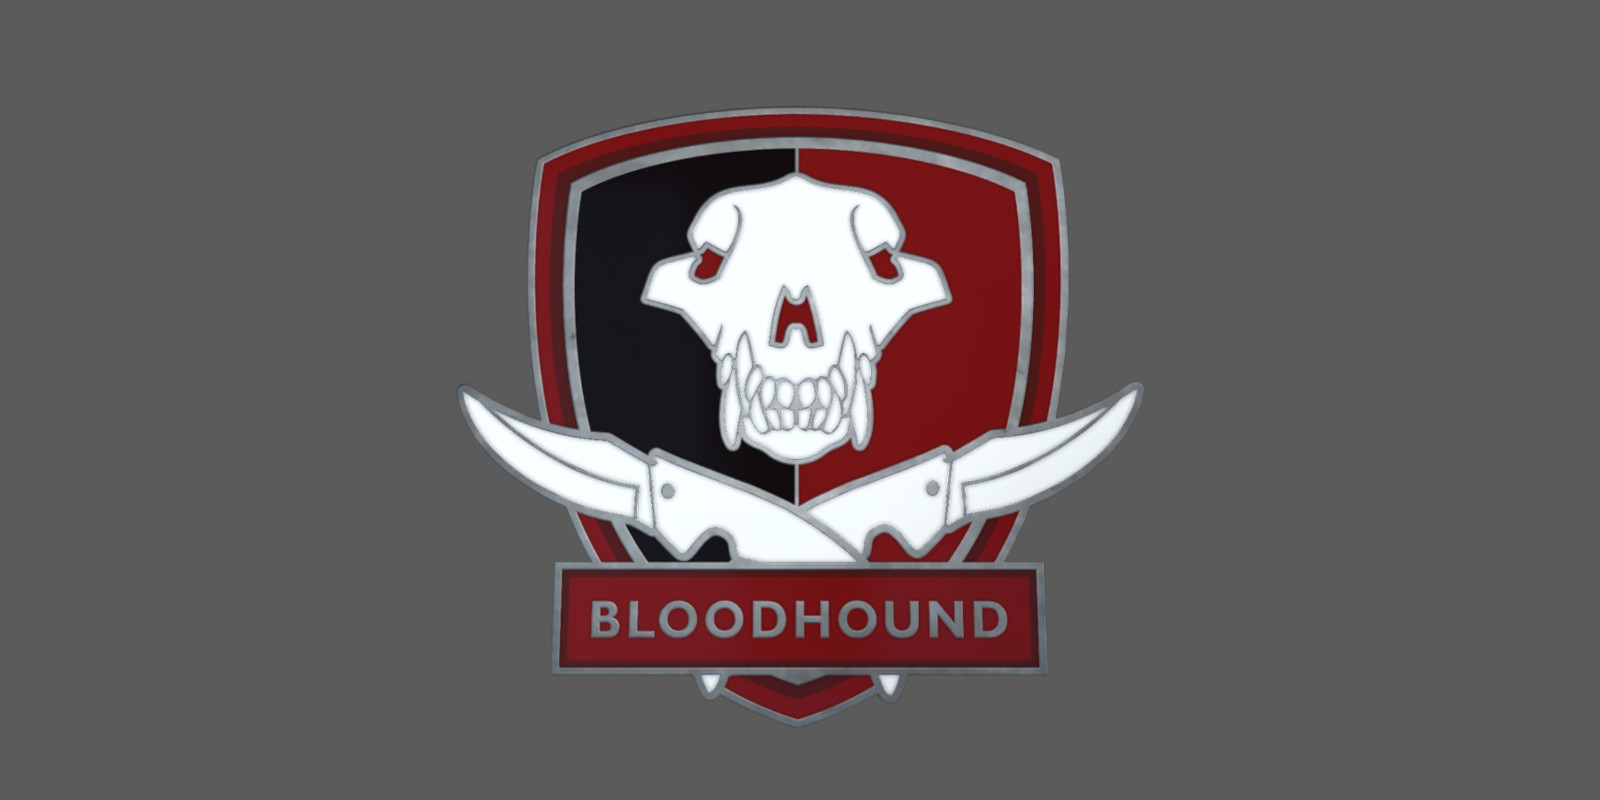 CS:GO - Series 2 - Bloodhound Collectible Pin